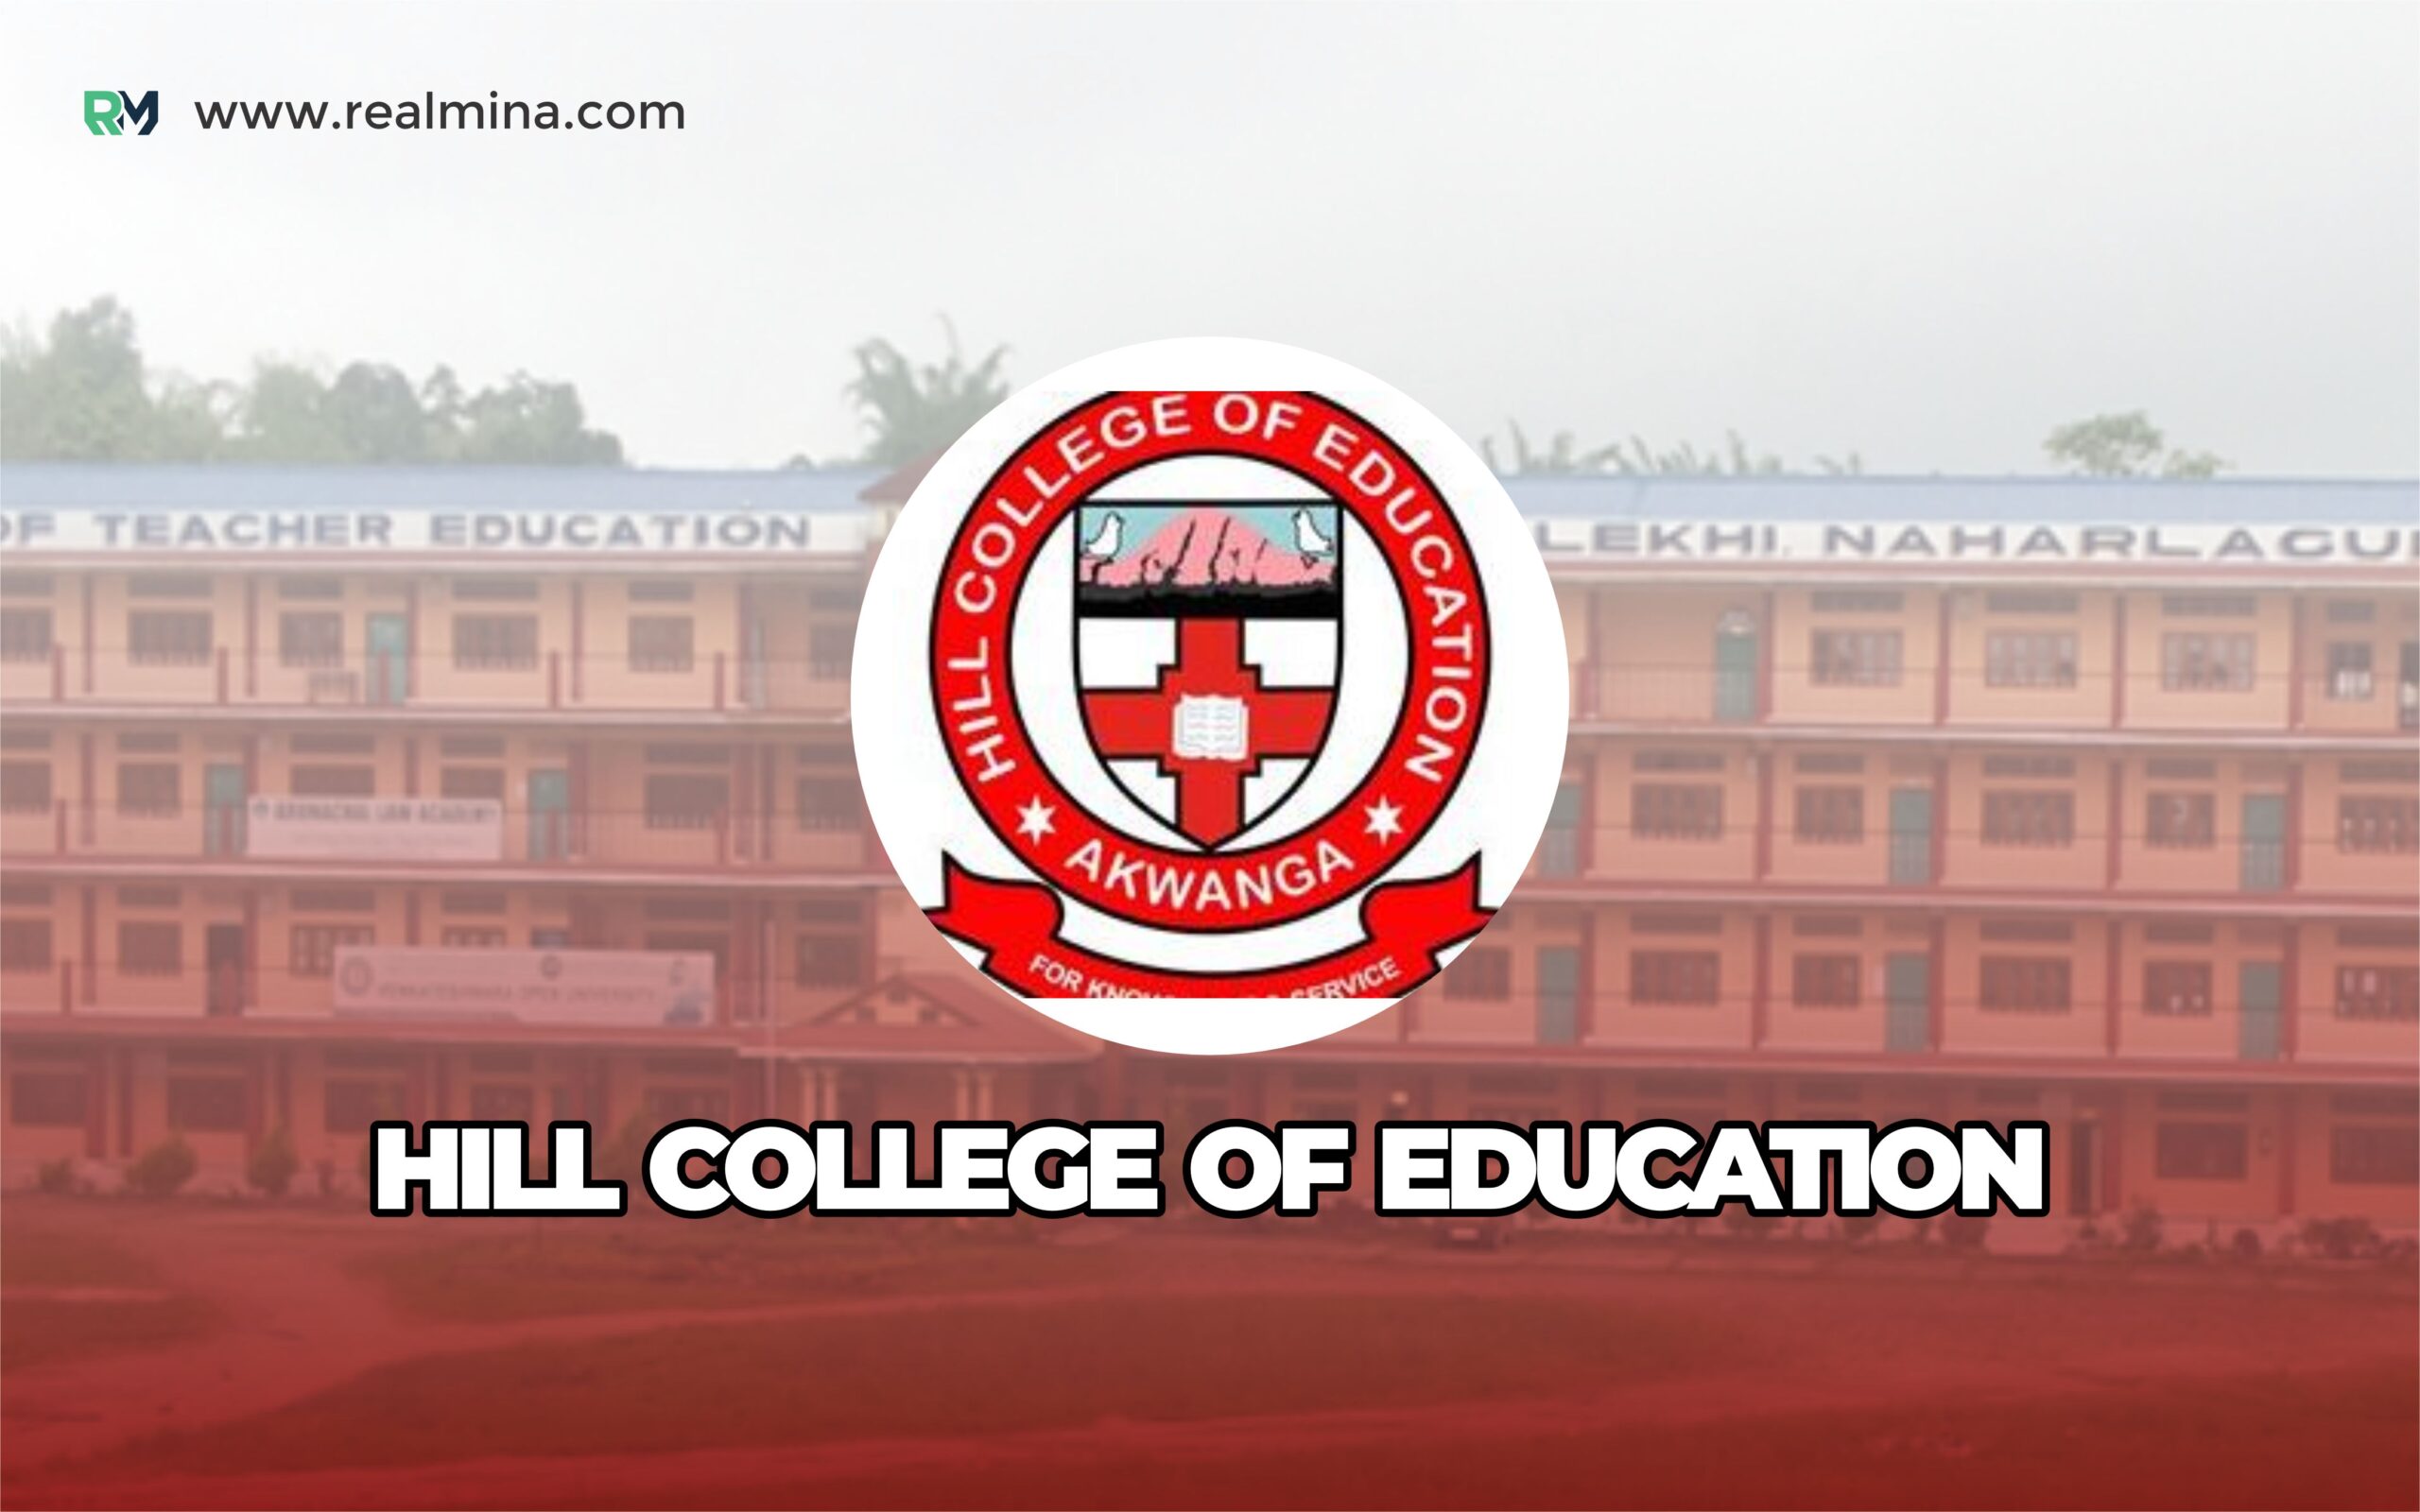 Hill College of Education combined convocation ceremony